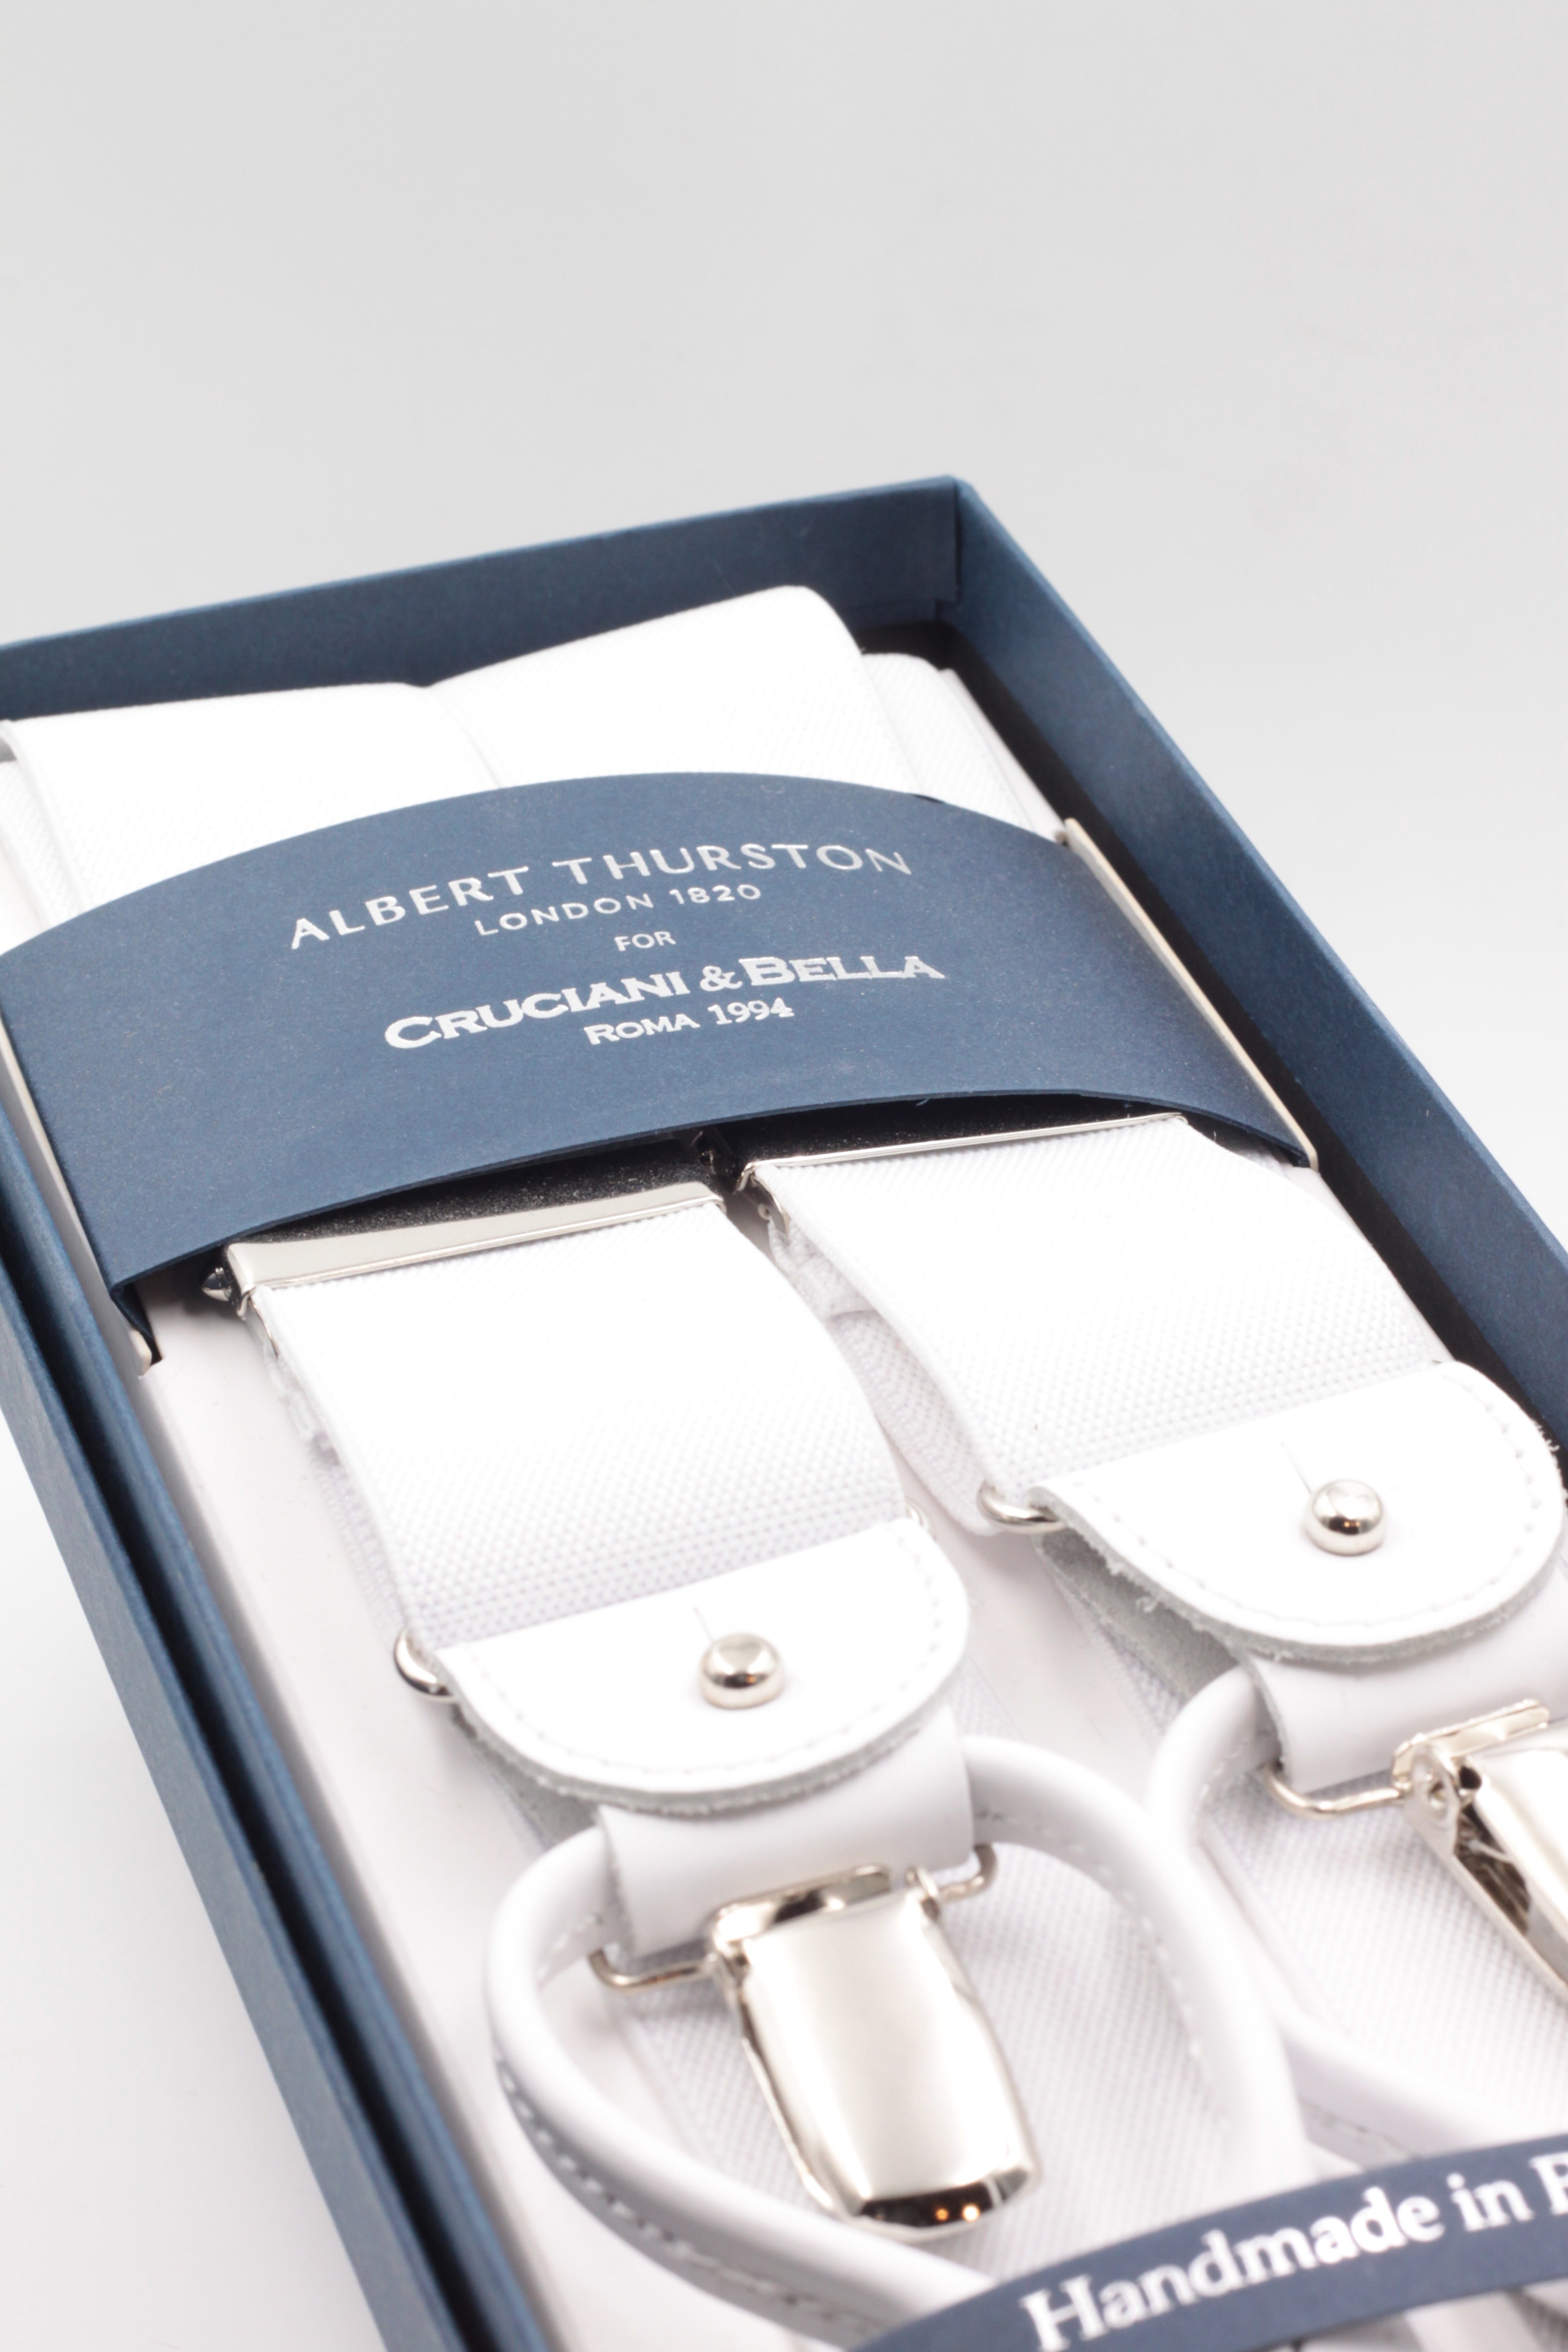 Albert Thurston for Cruciani & Bella Made in England 2 in 1 Adjustable Sizing 35 mm elastic braces White plain Y-Shaped Nickel Fittings